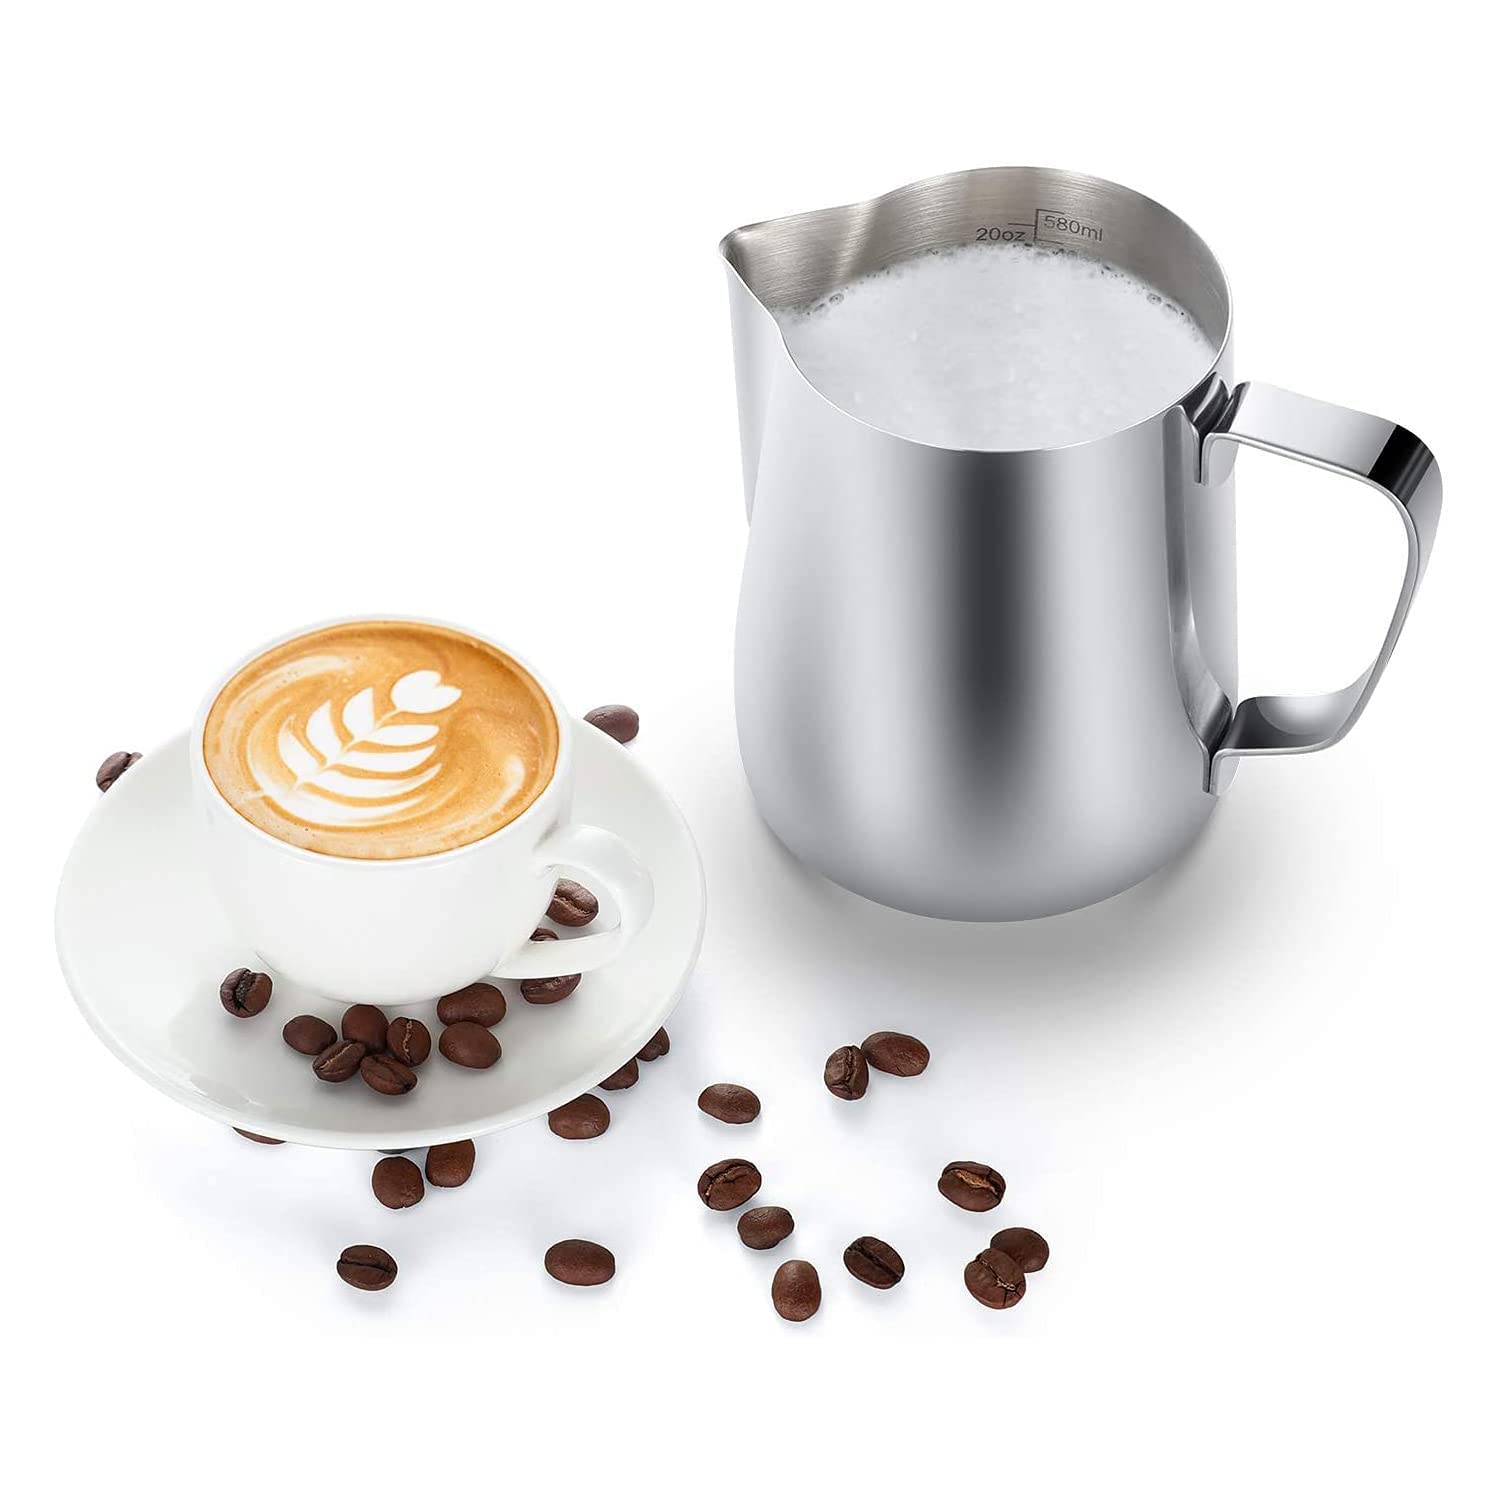 Milk Frothing Pitcher 304 Stainless Steel Milk Frother Cup 20 oz (600ml) for Coffee Arts/Espresso/Cappuccino